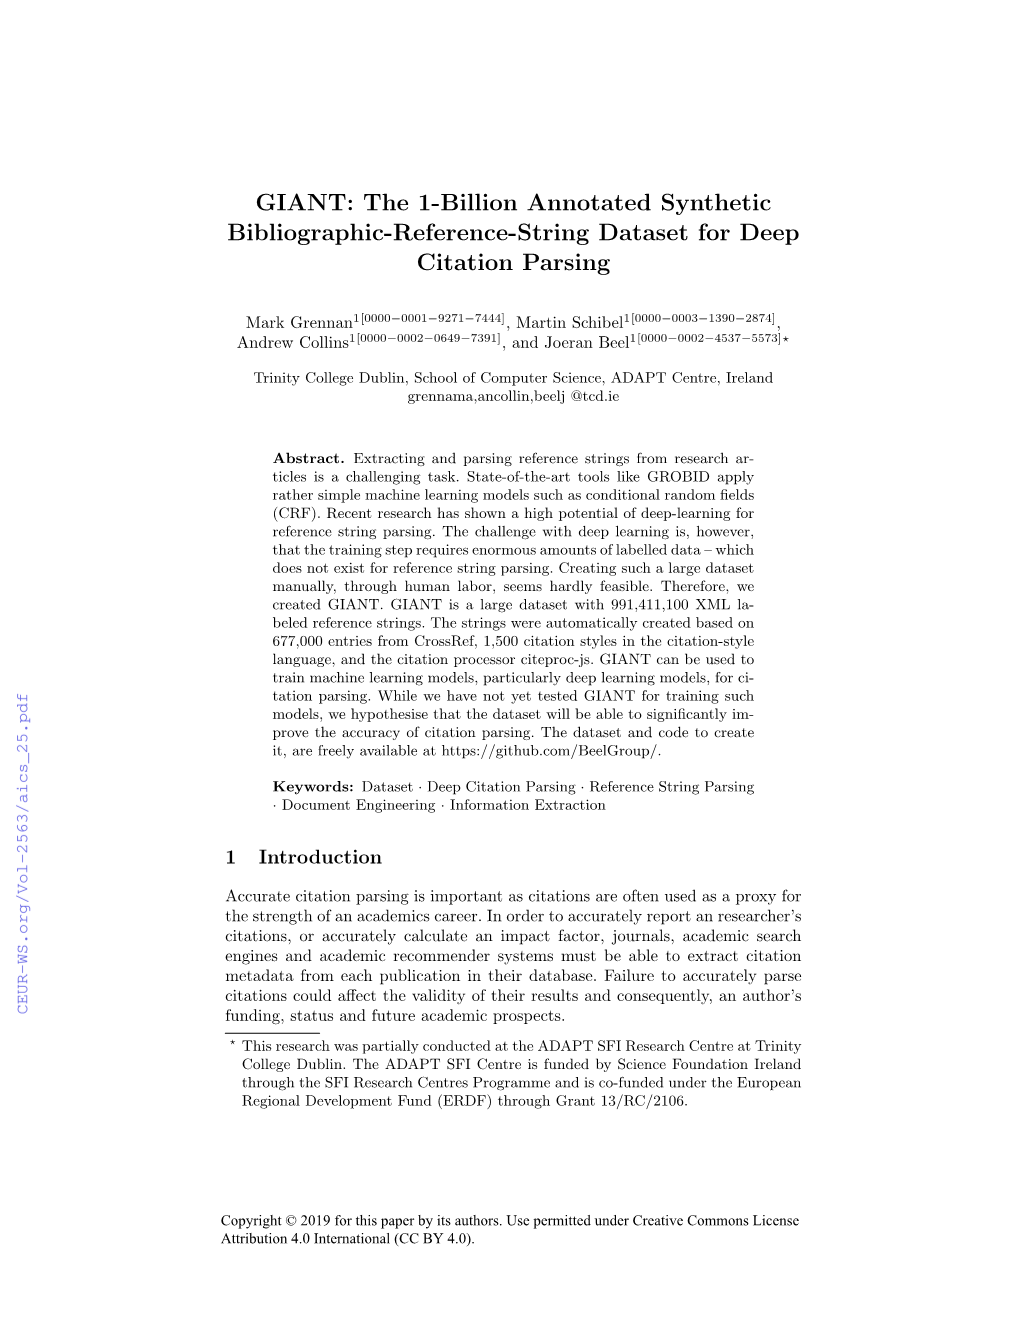 GIANT: the 1-Billion Annotated Synthetic Bibliographic-Reference-String Dataset for Deep Citation Parsing